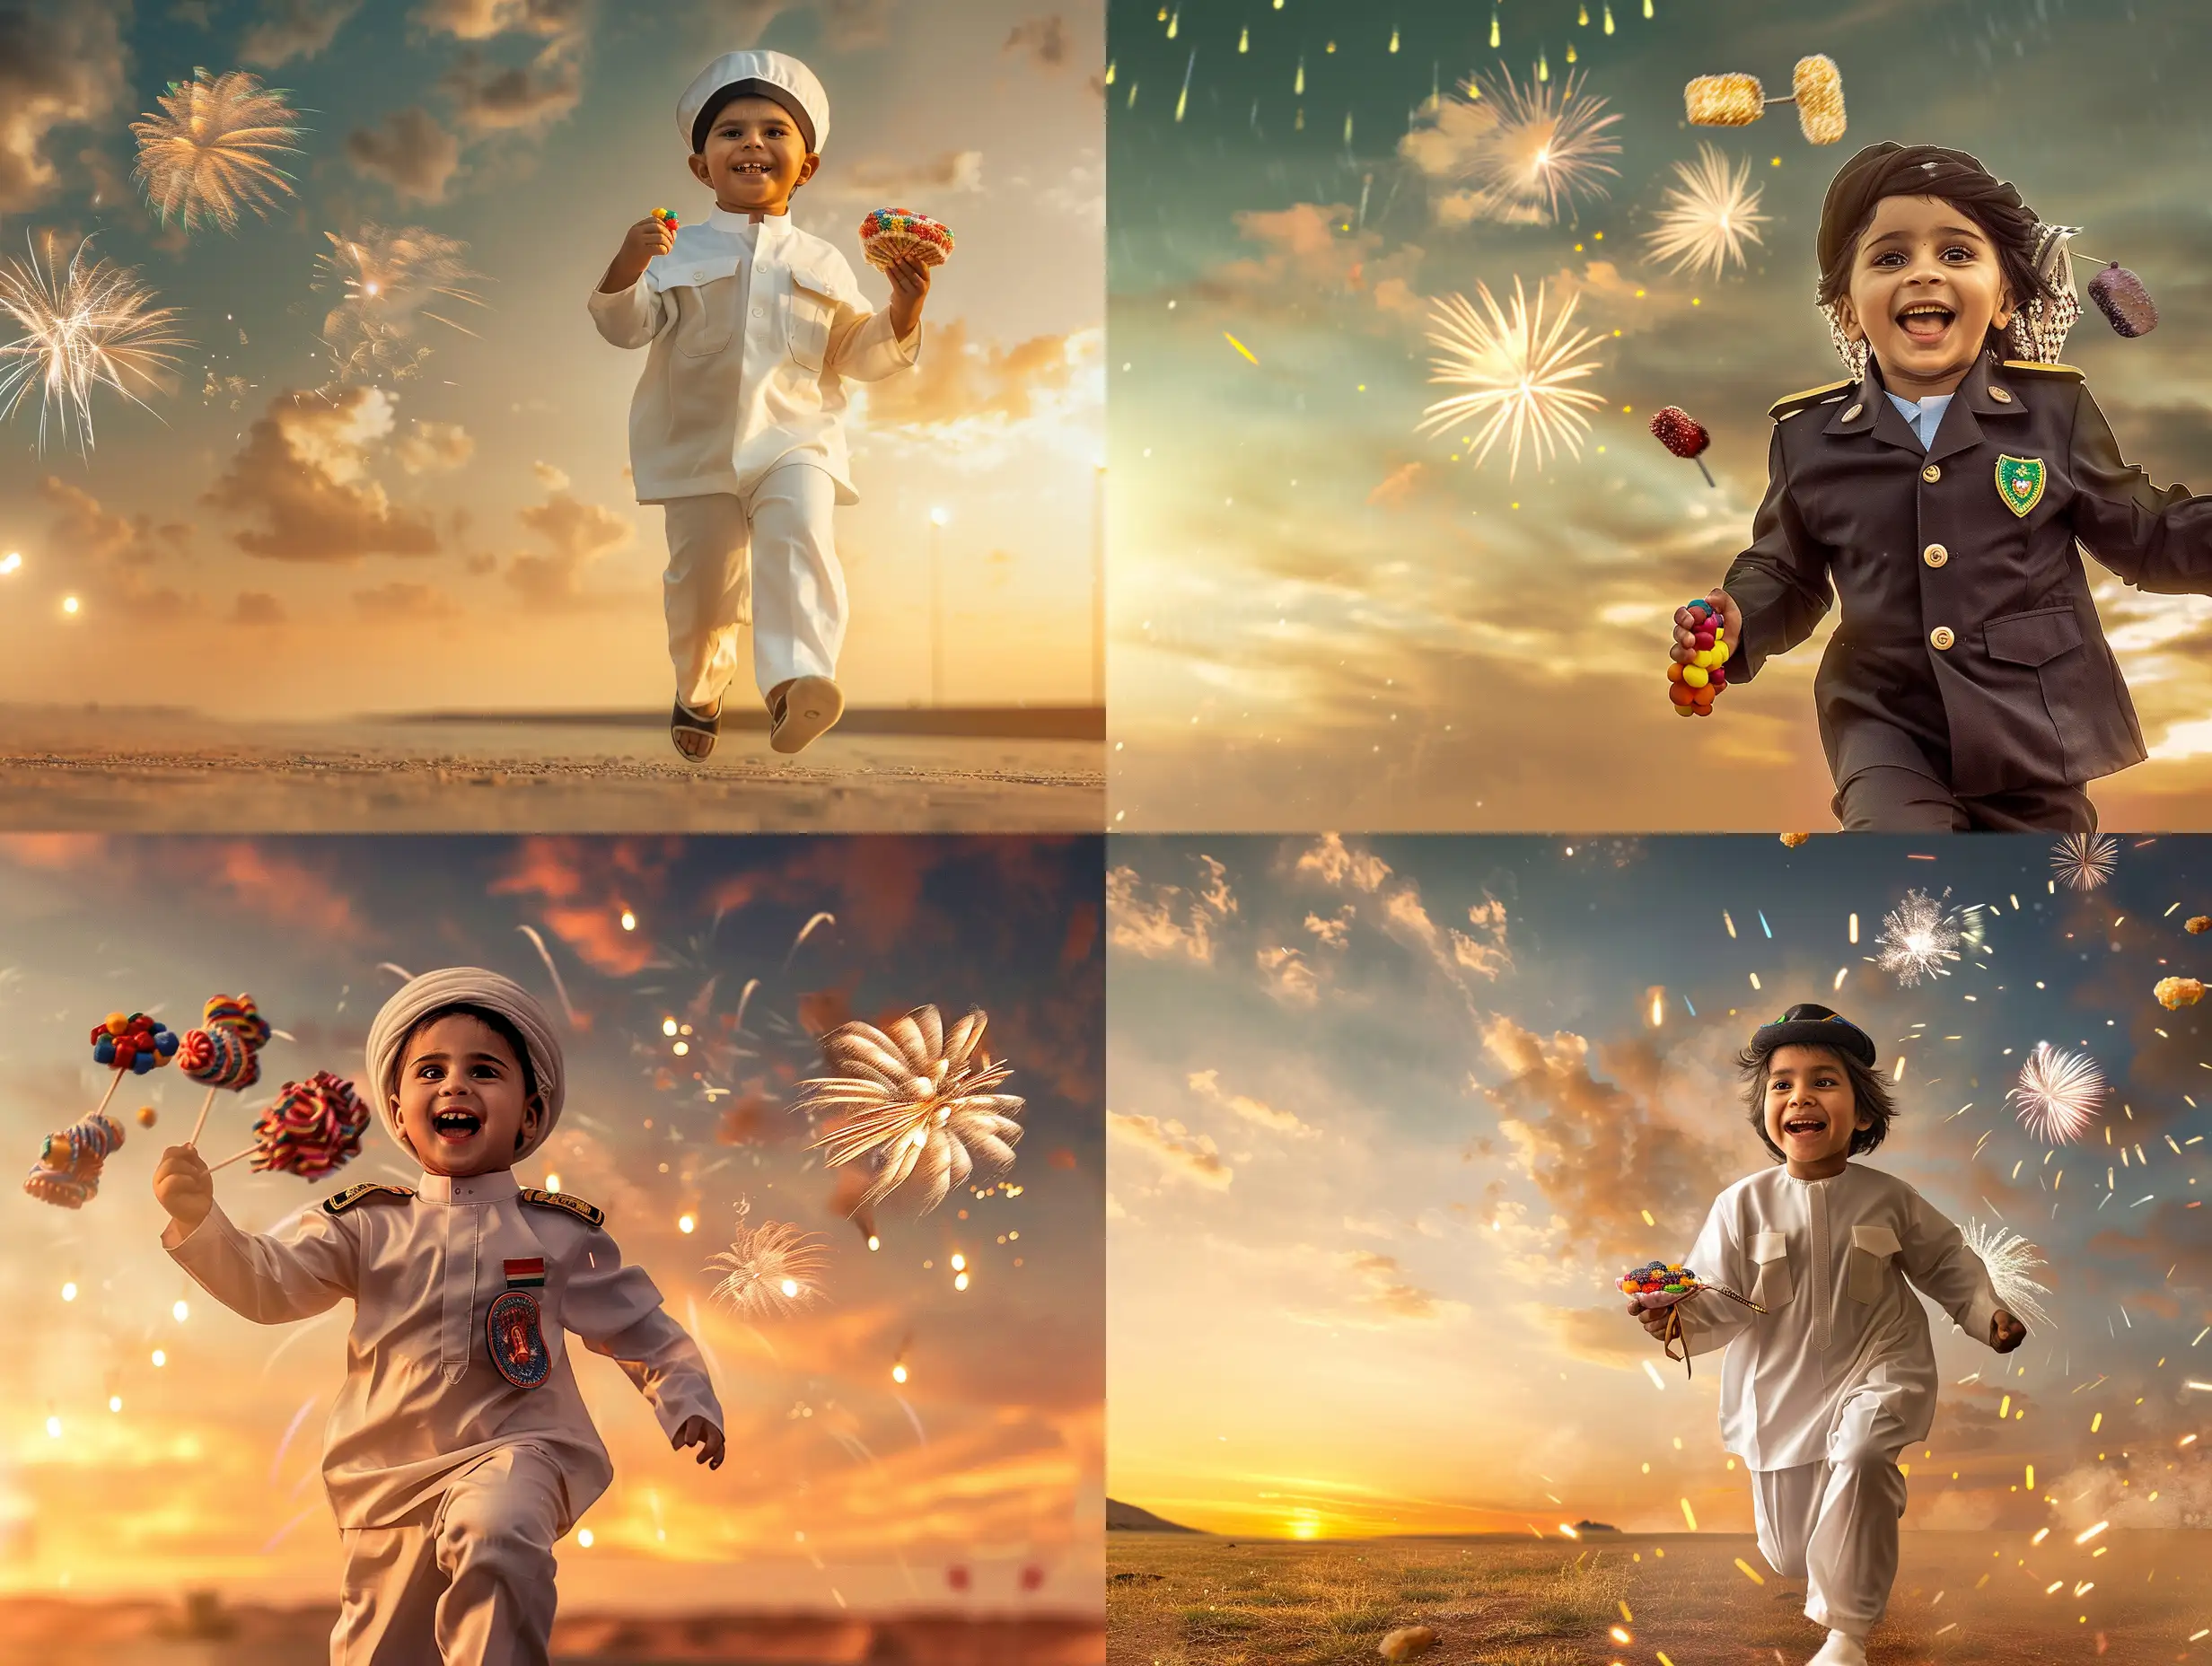 A child with sweets, in Saudi uniform, running happily with fireworks in the sky
Professional portrait photography, HD digital camera, contemporary era, warm color palette., Portrait, Realism, Keyshot, Normal perspective, Mirrorless Camera, Natural Light, Delight,